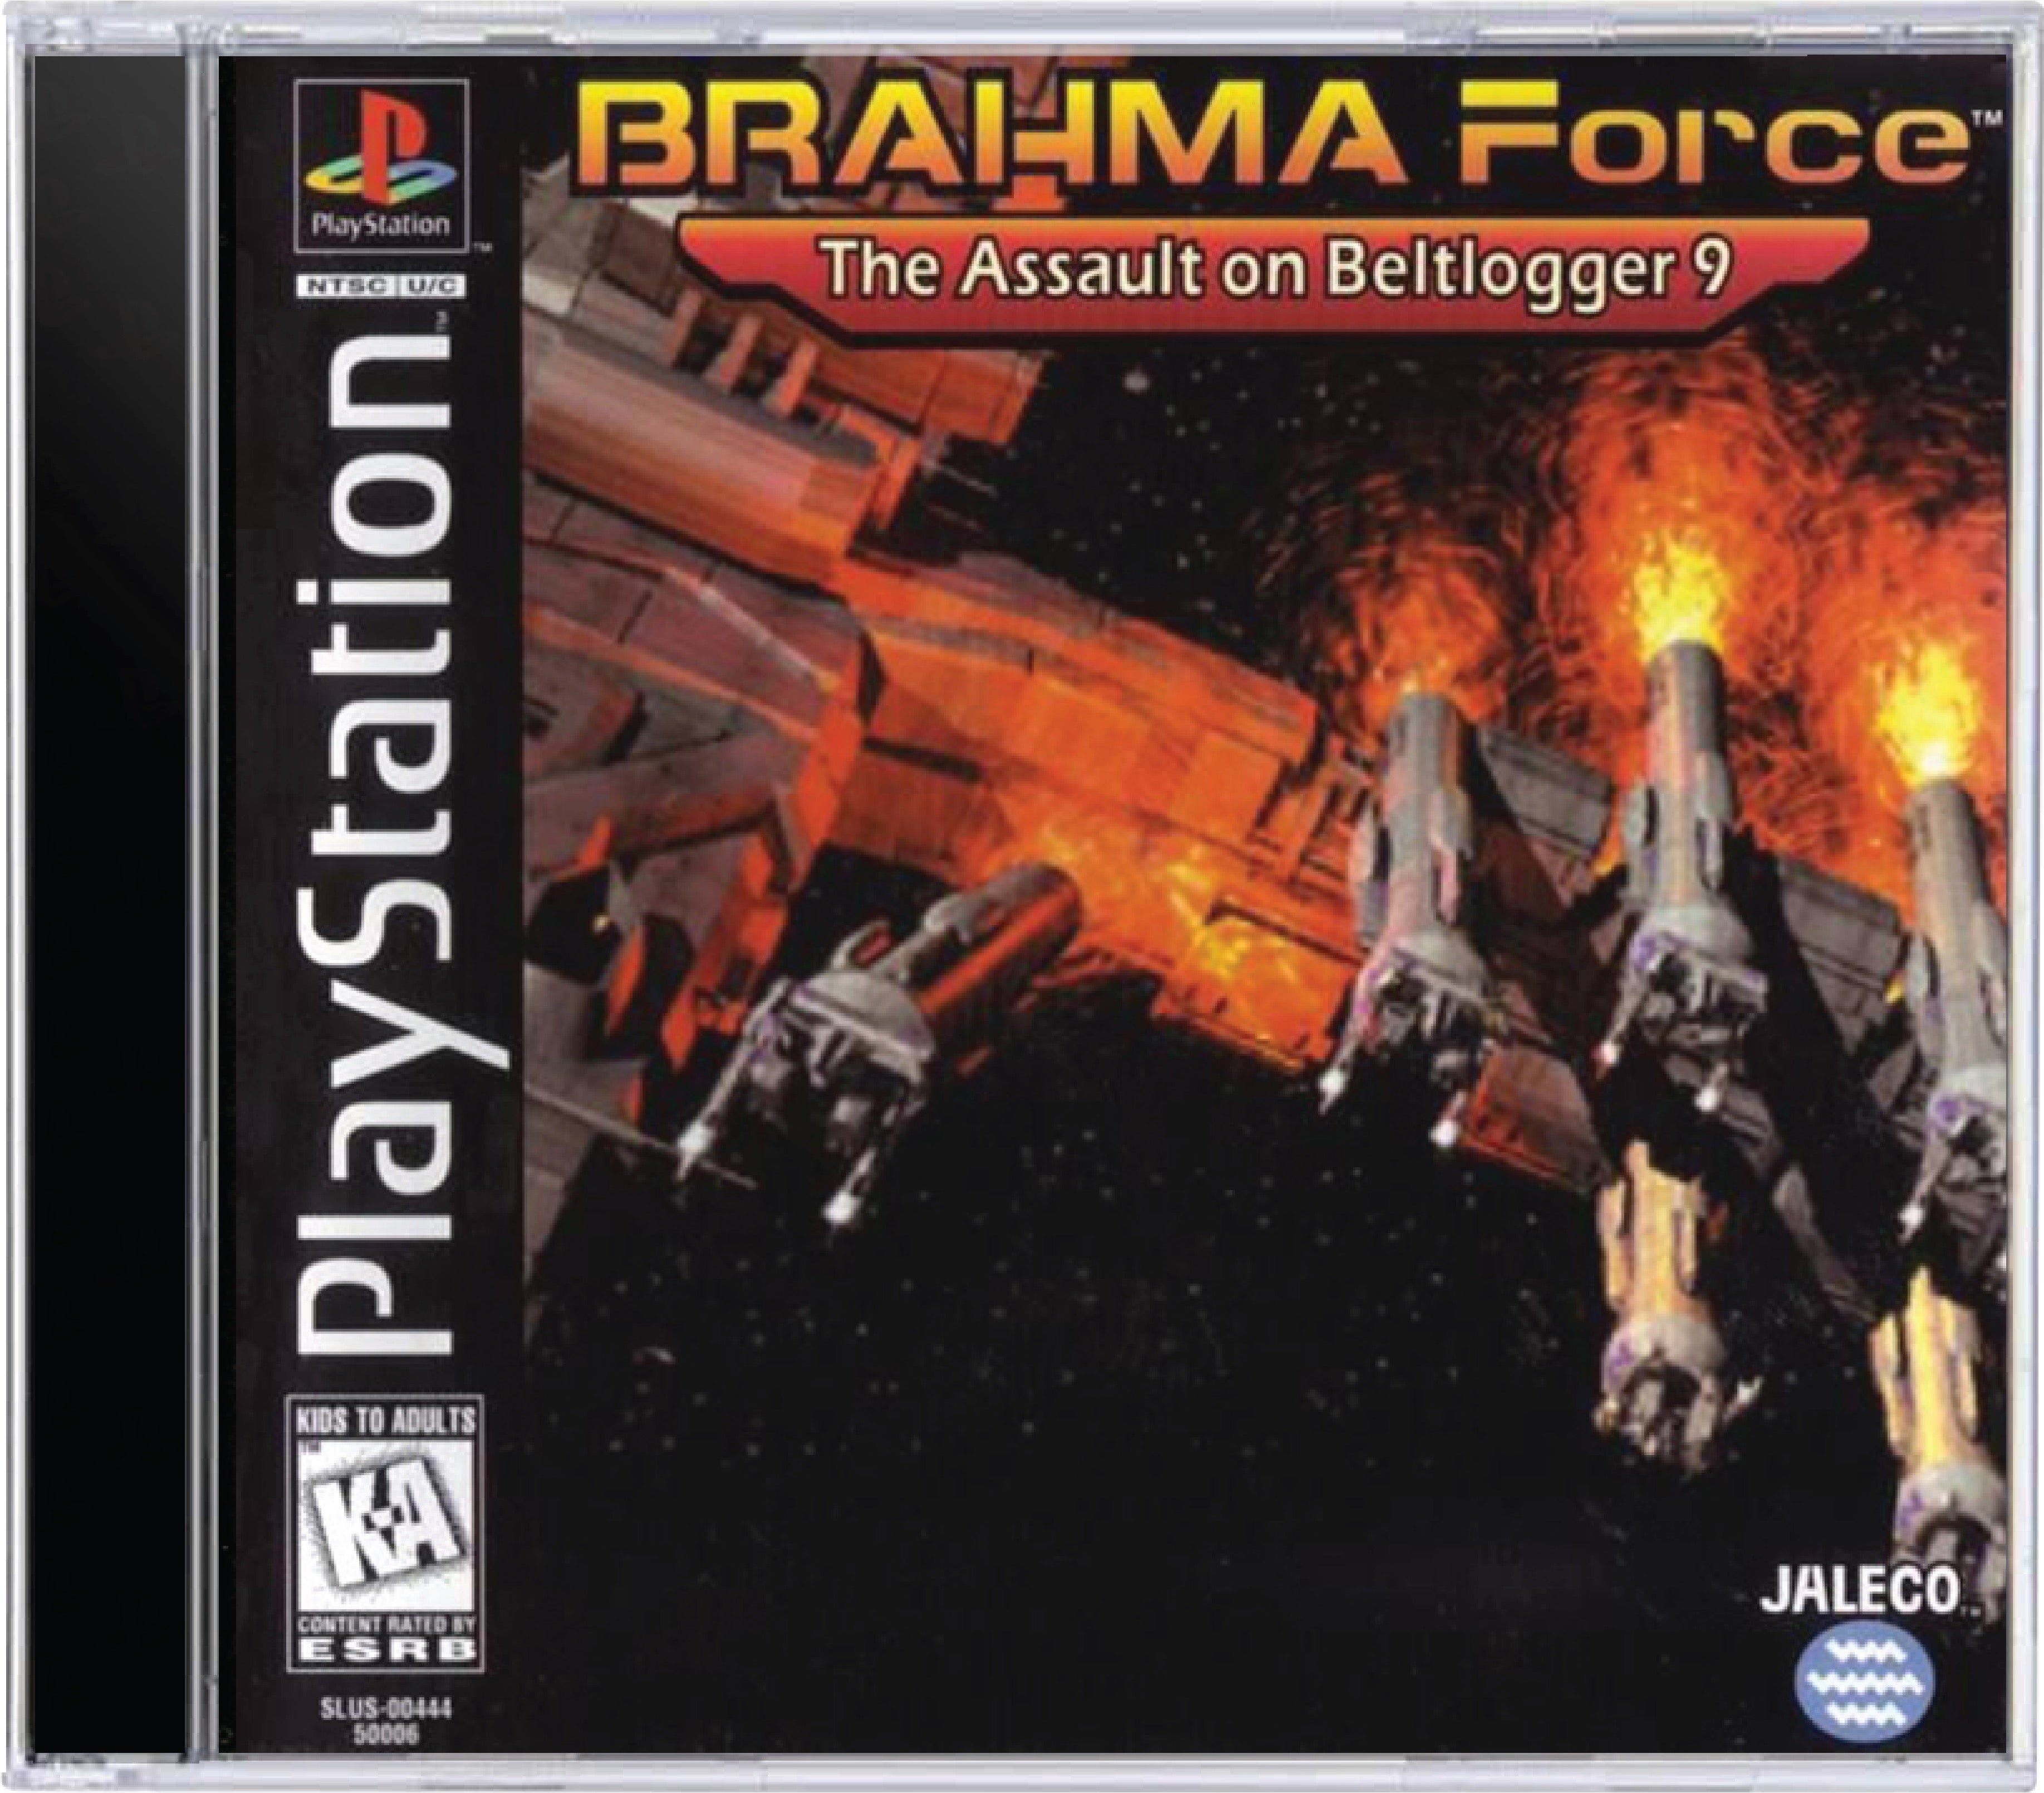 BRAHMA Force the Assault on Beltlogger 9 Cover Art and Product Photo